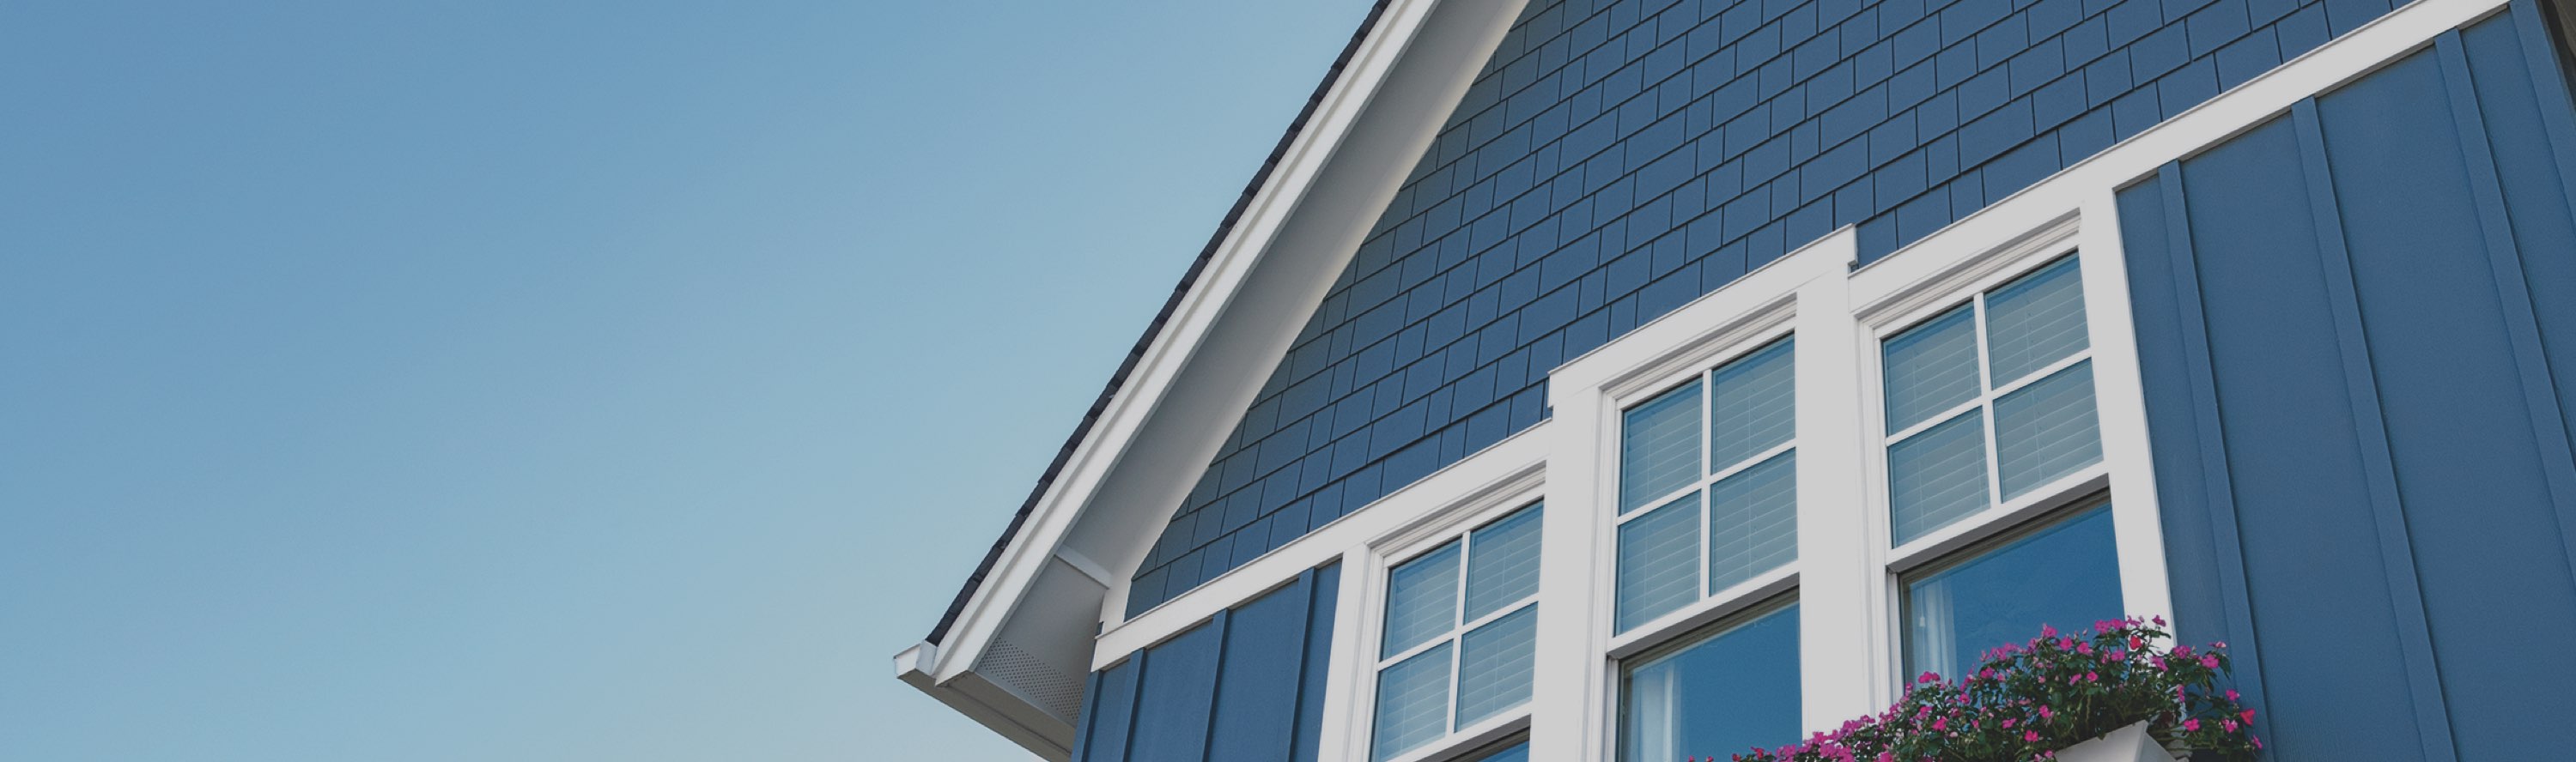 James Hardie Lap Siding on residential home